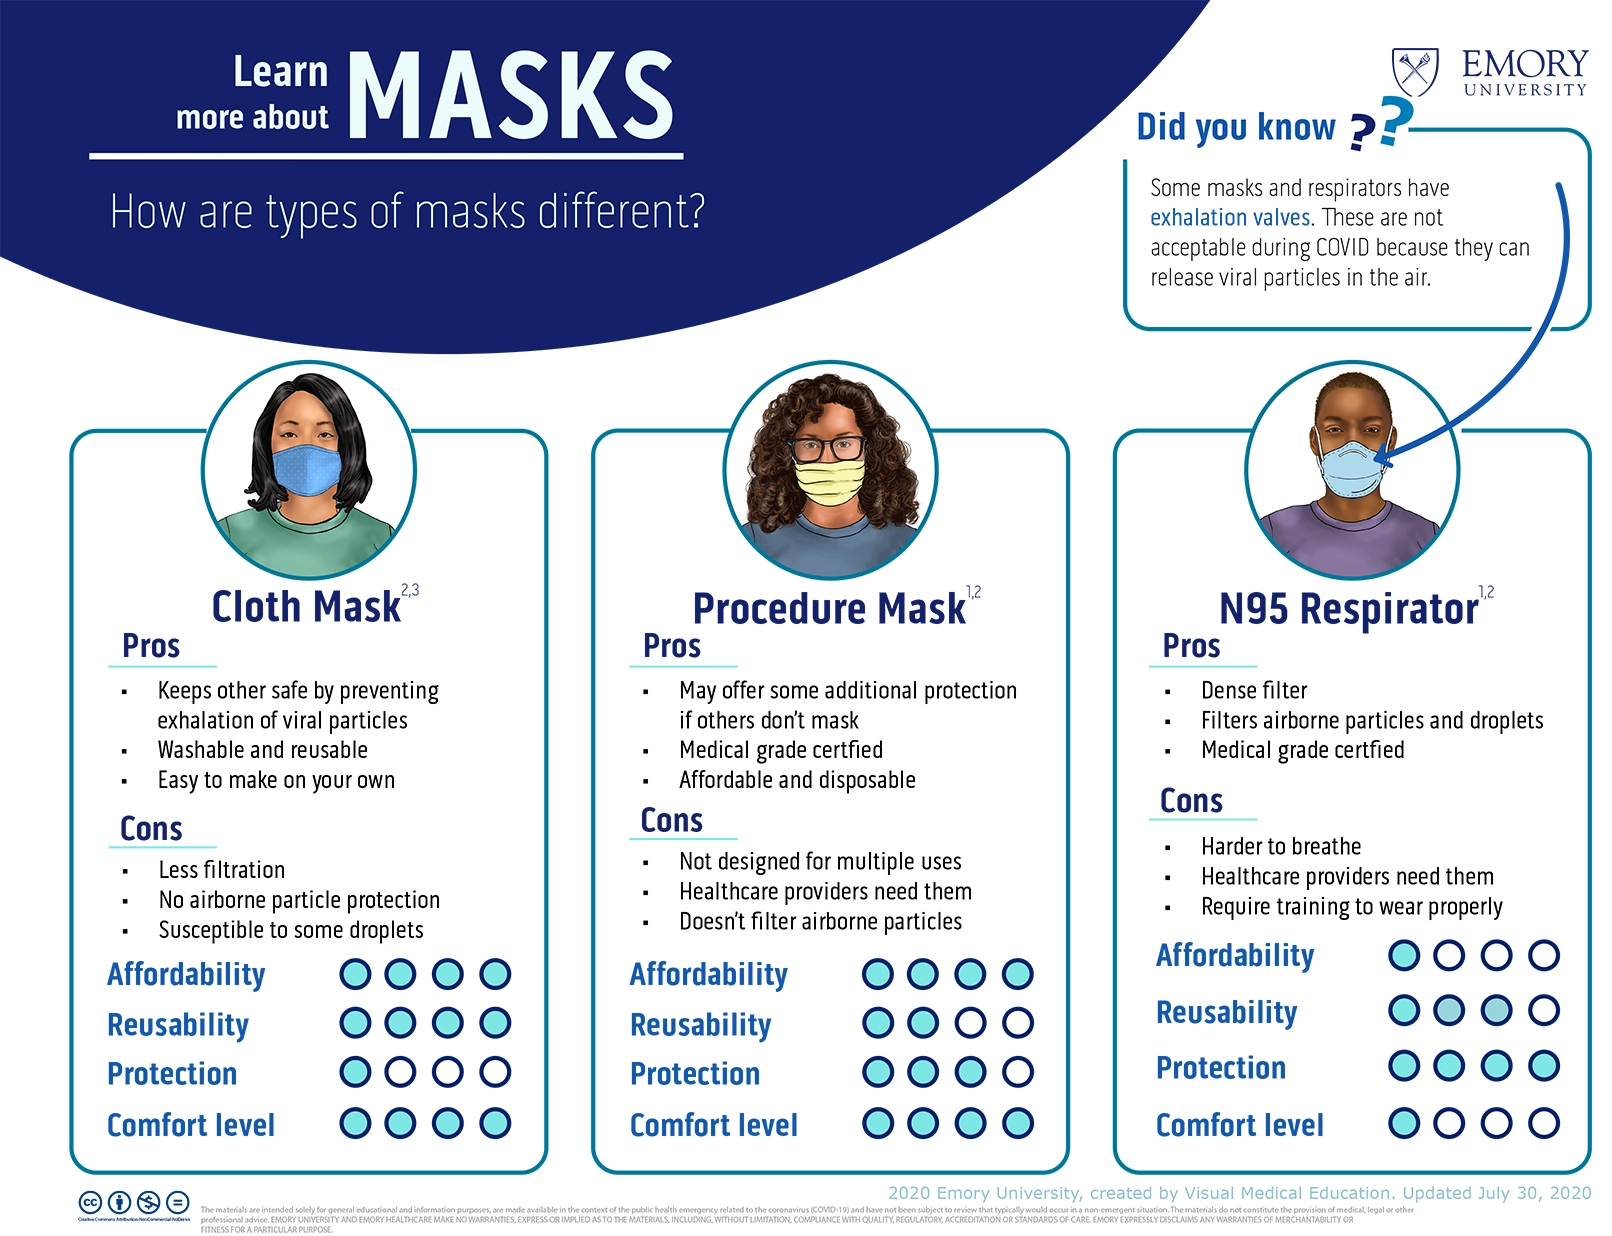 A page in Learm About Masks, © Emory University 2020